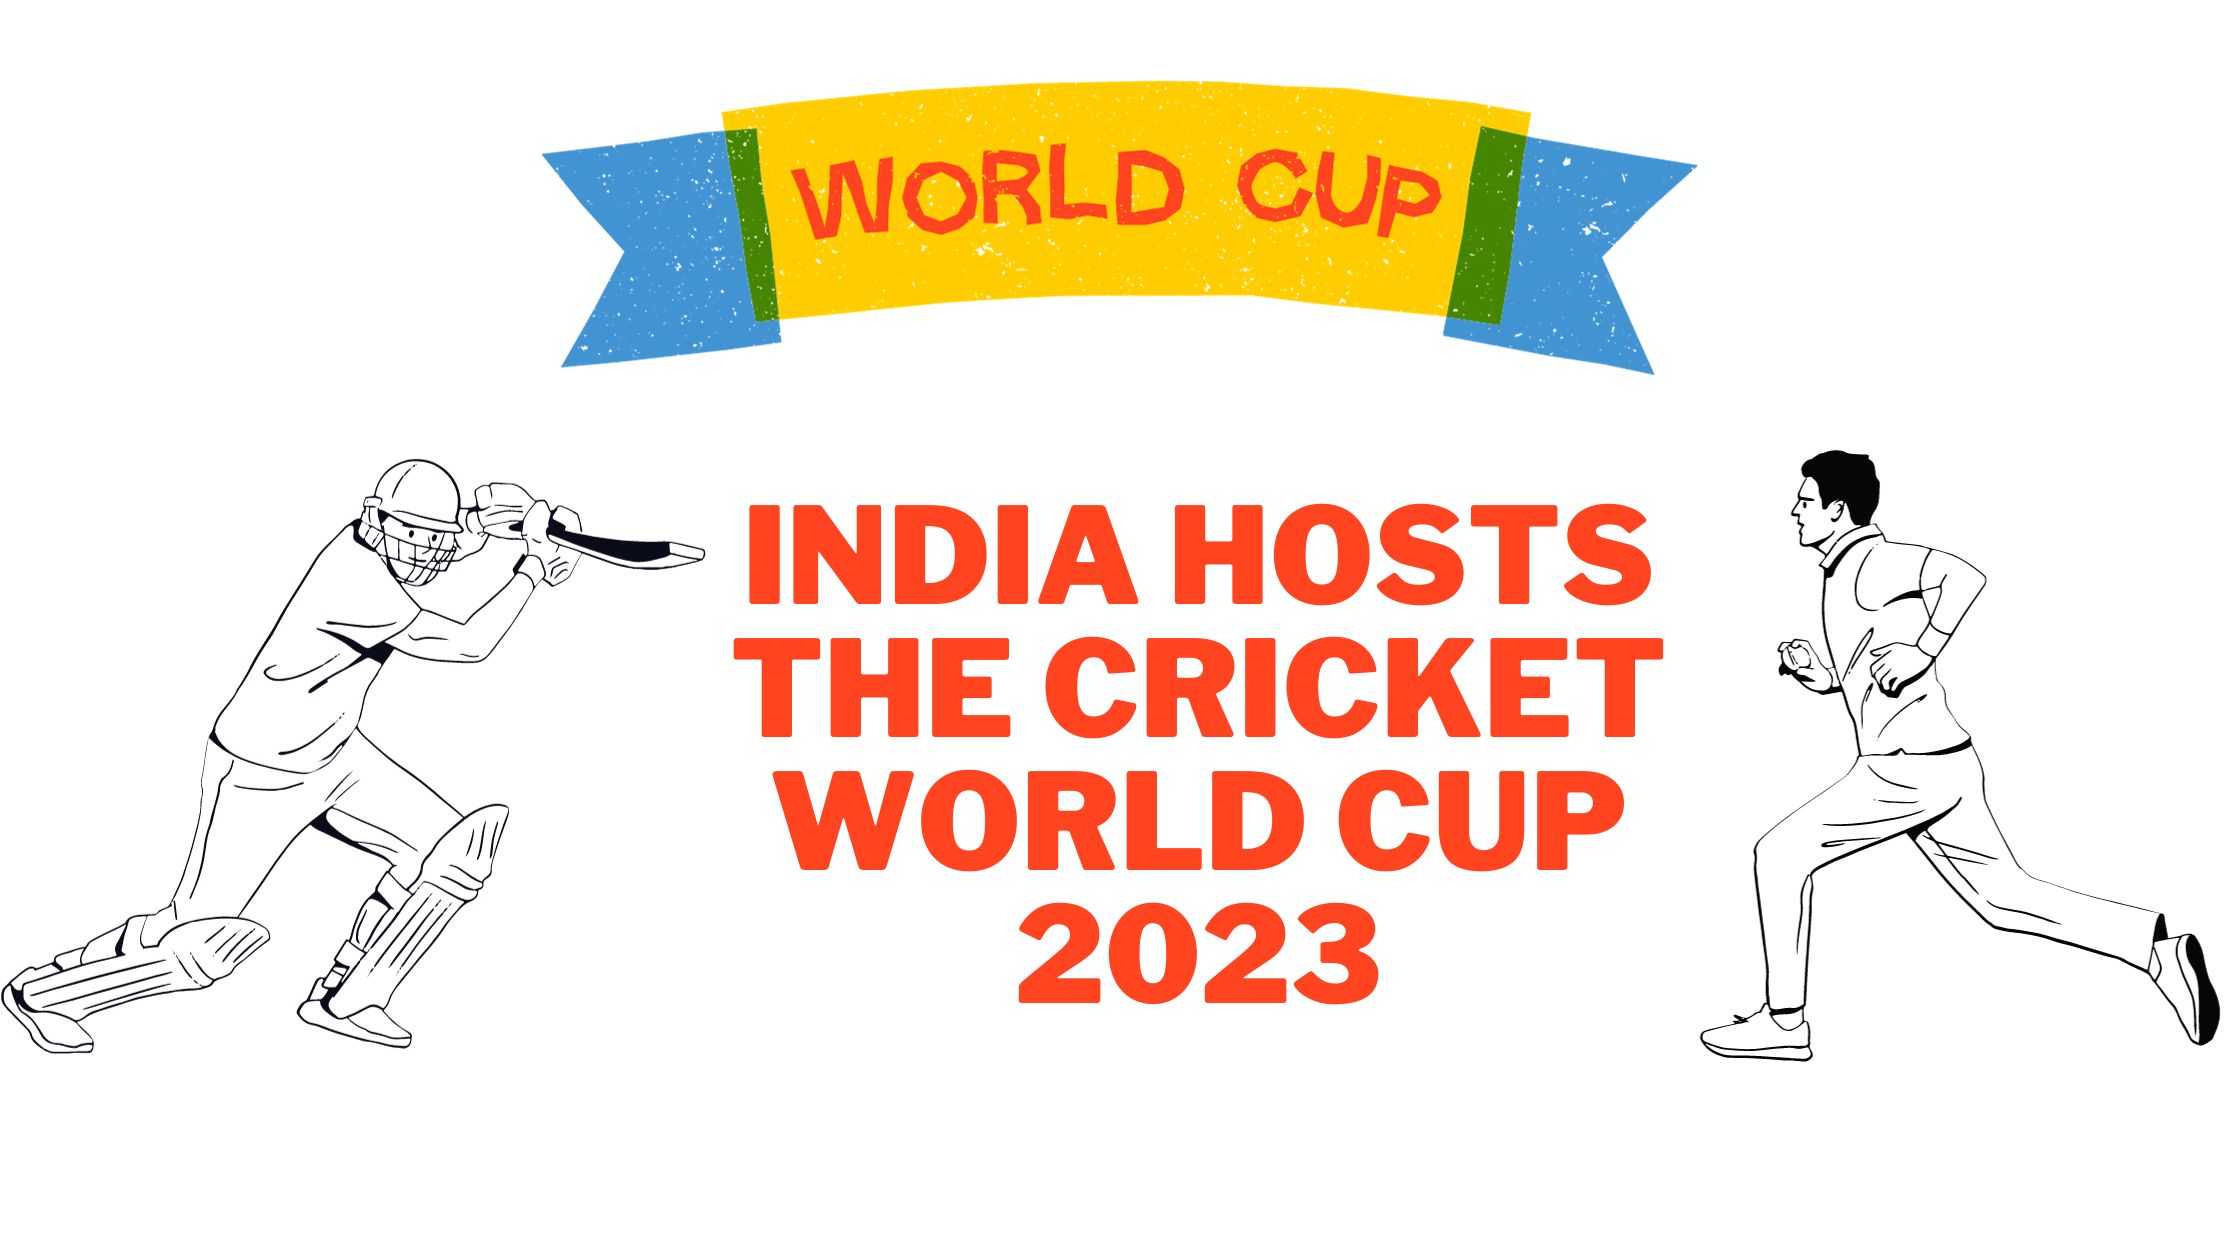 India Hosts the Cricket World Cup 2023